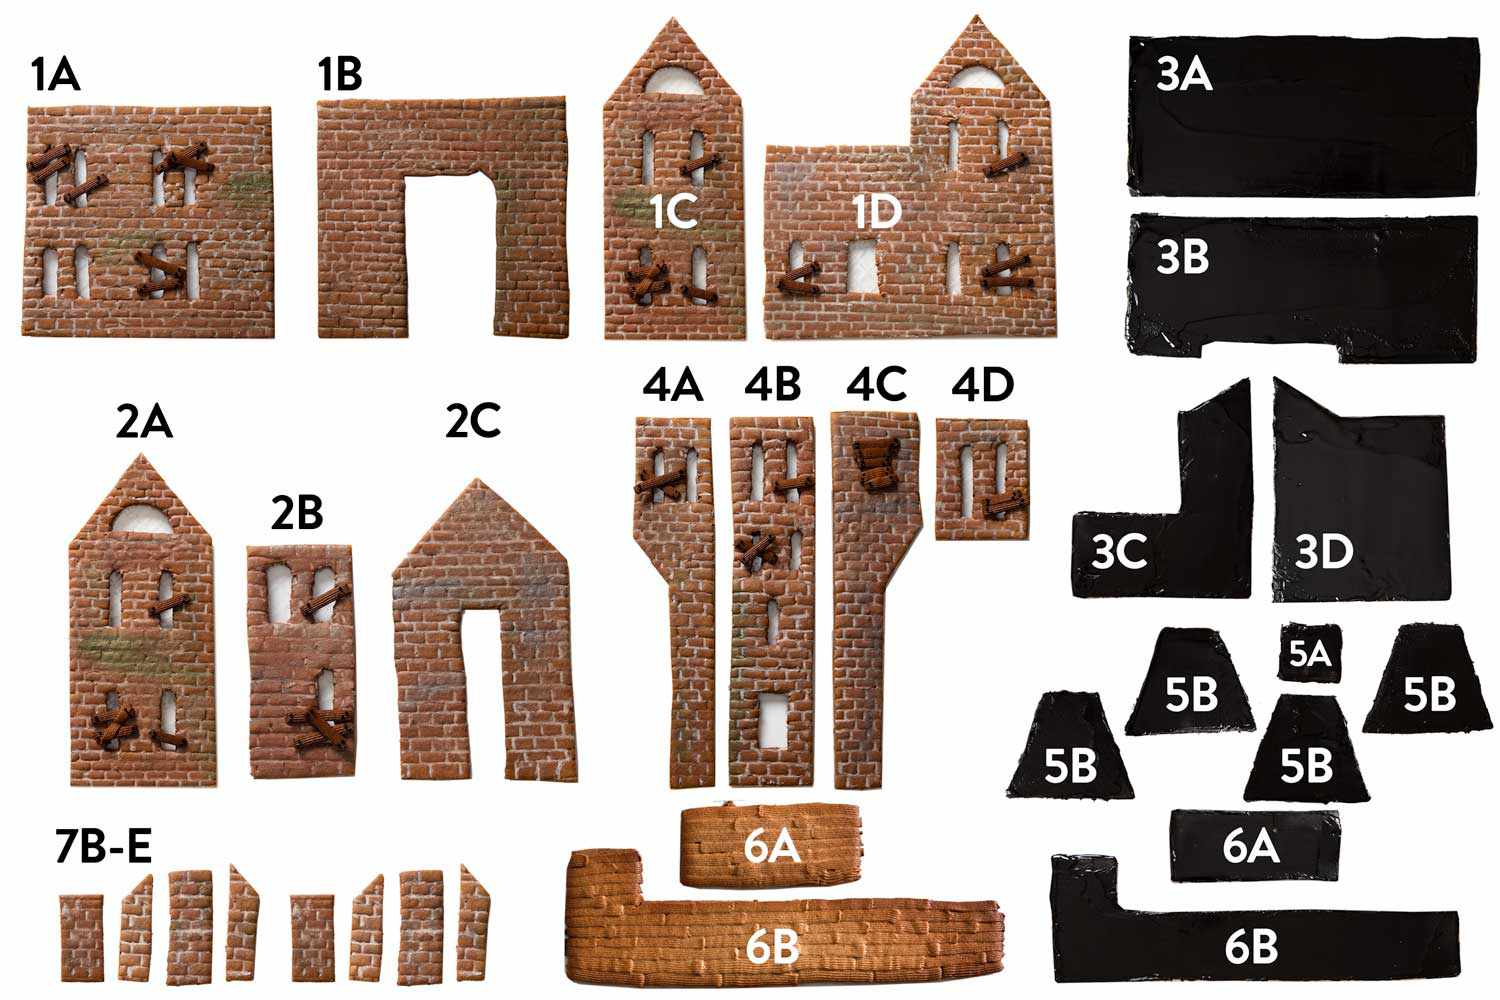 Collage of photos showing each segment of the haunted gingerbread house, with corresponding number/letter labels